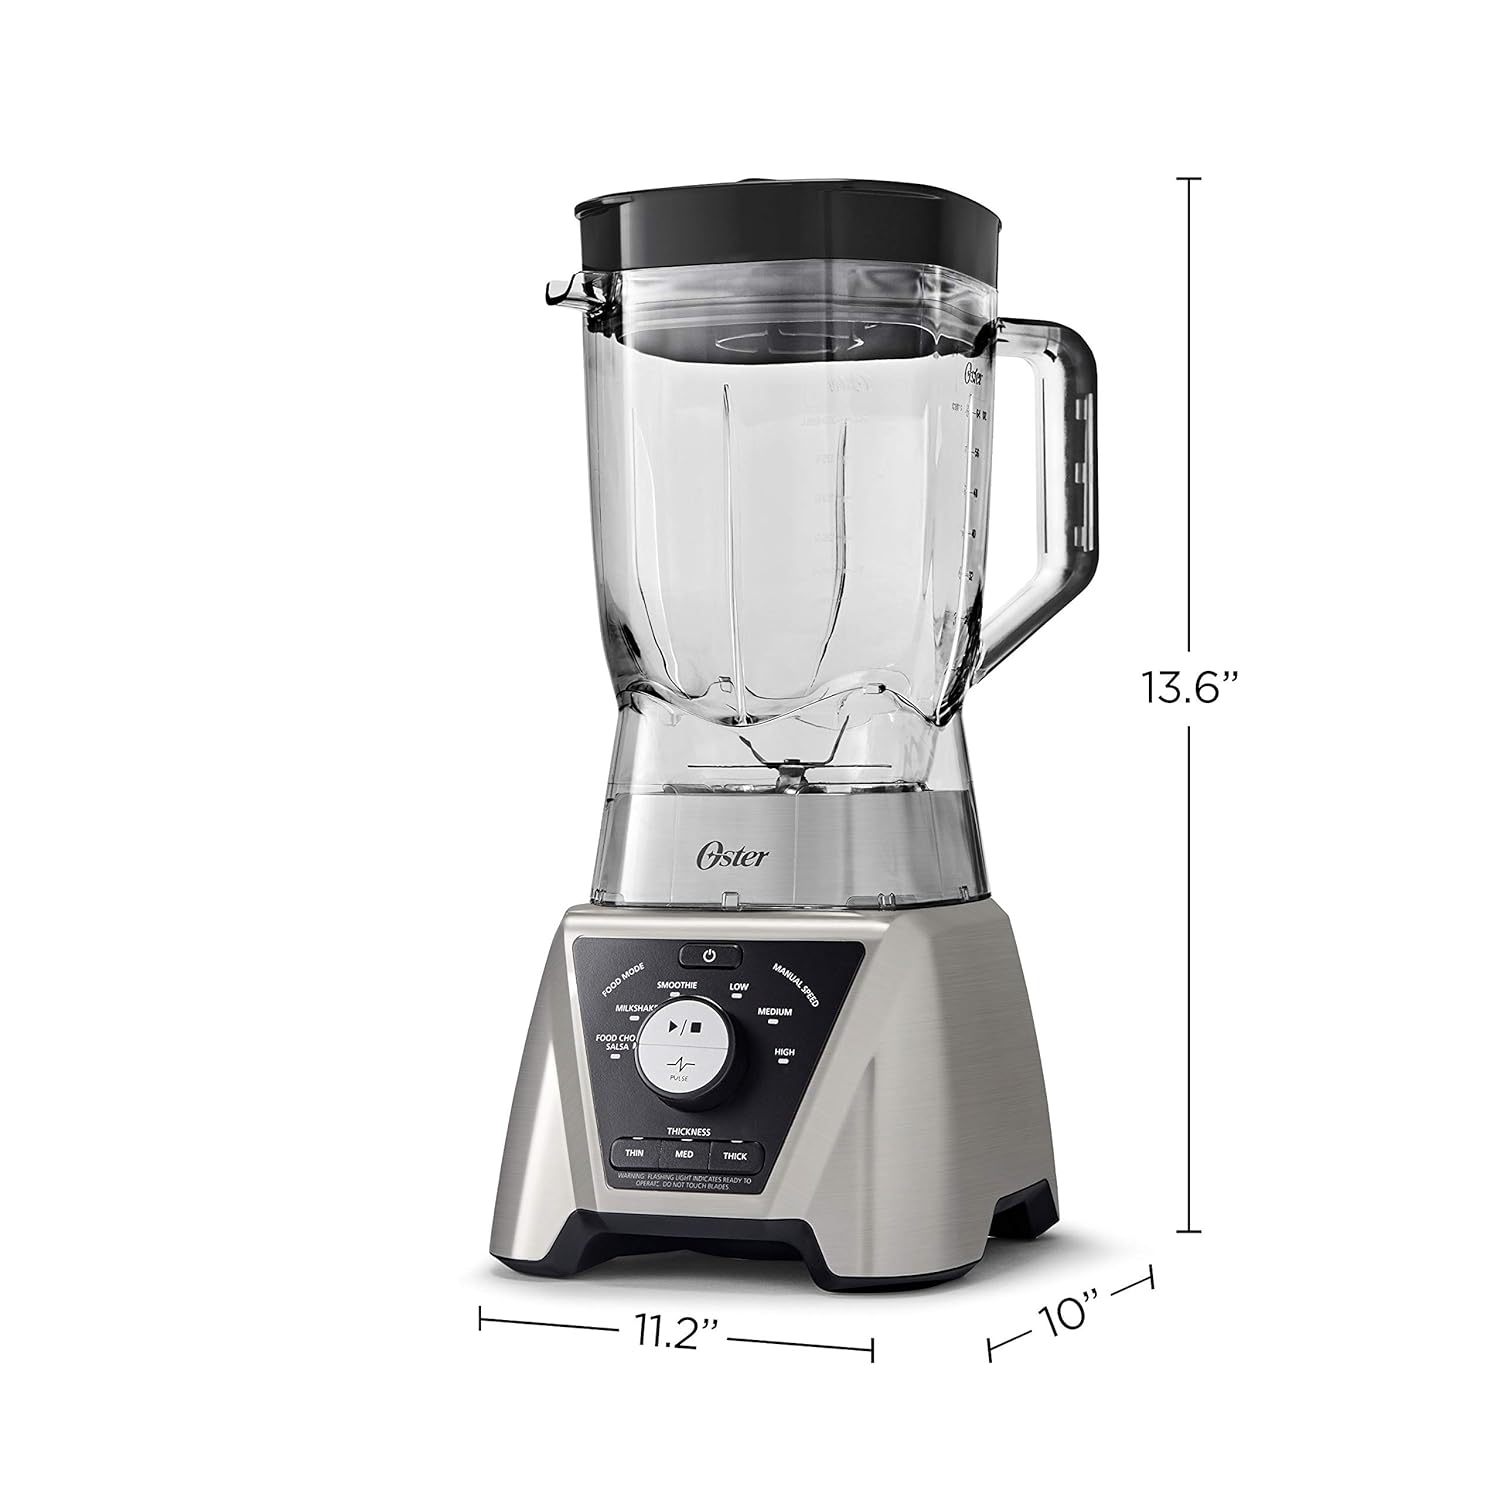 Oster BLSTTS-CB2-000 Pro Blender with Texture Select Settings, 2 Blend-N-Go Cups and Tritan Jar, 64 Ounces, Brushed Nickel…